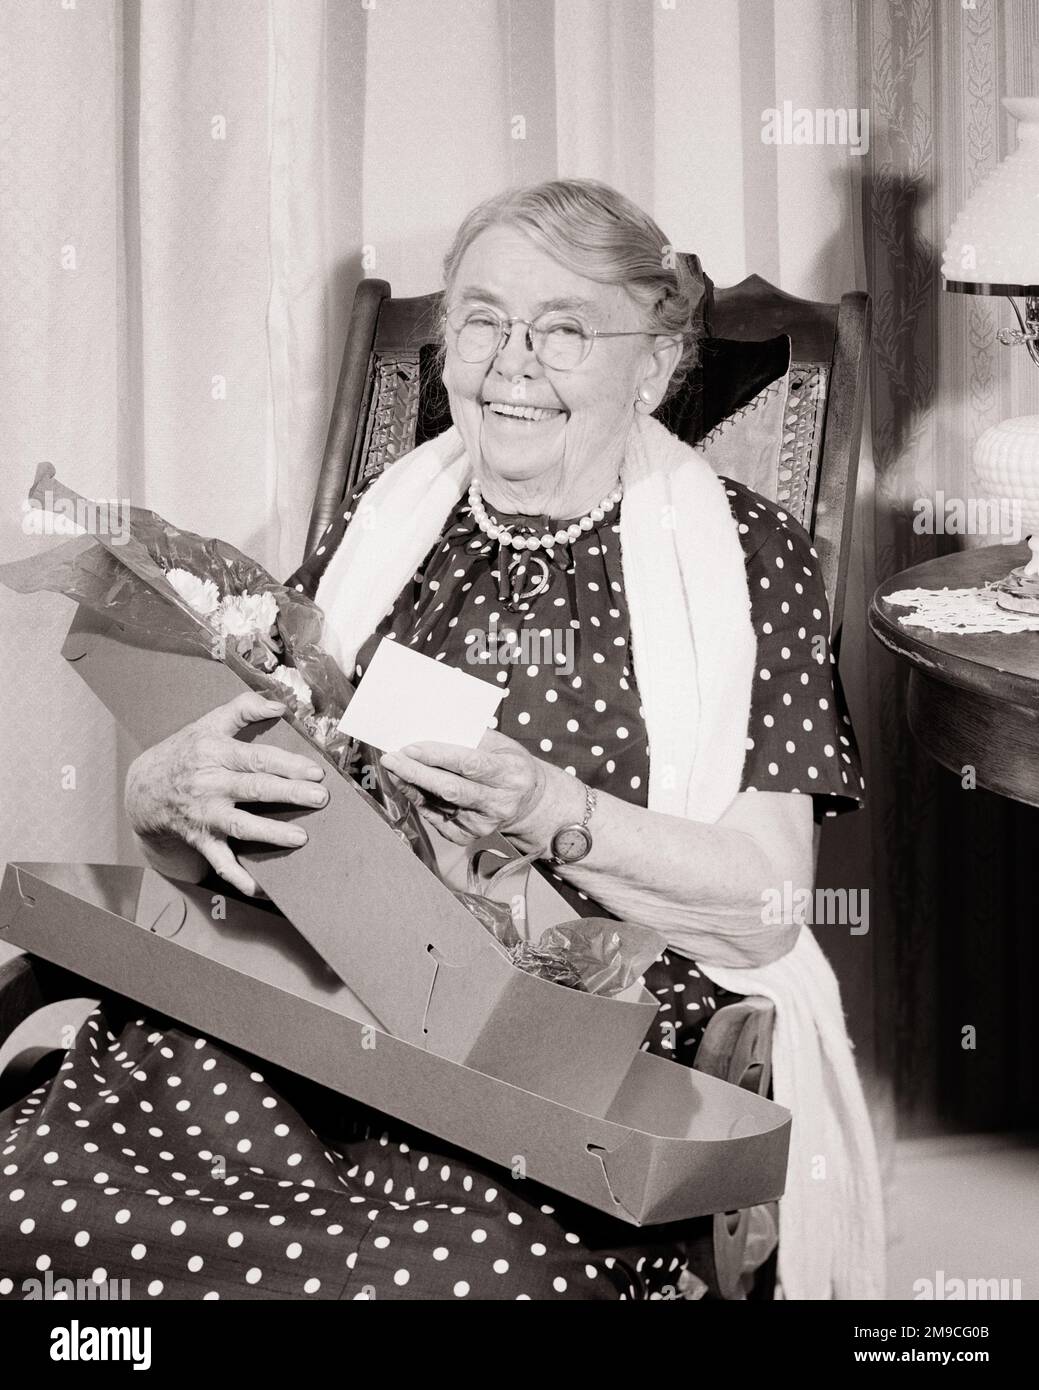 1960s SMILING GRANDMOTHER WEARING POLKA DOT DRESS SITTING IN ROCKING CHAIR HOLDING A BOX OF FRESH FLOWERS FOR MOTHER’S DAY - m7108 CRS001 HARS GRANDPARENTS PLEASED JOY LIFESTYLE CELEBRATION ELDER FEMALES GRANDPARENT HOME LIFE COPY SPACE HALF-LENGTH LADIES PERSONS SENIOR ADULT B&W EYE CONTACT SENIOR WOMAN DOT FRESH HAPPINESS OLD AGE WELLNESS OLDSTERS CHEERFUL OLDSTER POLKA MOTHER'S DAY PRIDE GRANDMOTHERS SMILES ELDERS POLKA DOT JOYFUL REMEMBERED ELDERLY WOMAN MOMS MOTHER'S BLACK AND WHITE CAUCASIAN ETHNICITY GRANDMA OLD FASHIONED REMEMBRANCE Stock Photo